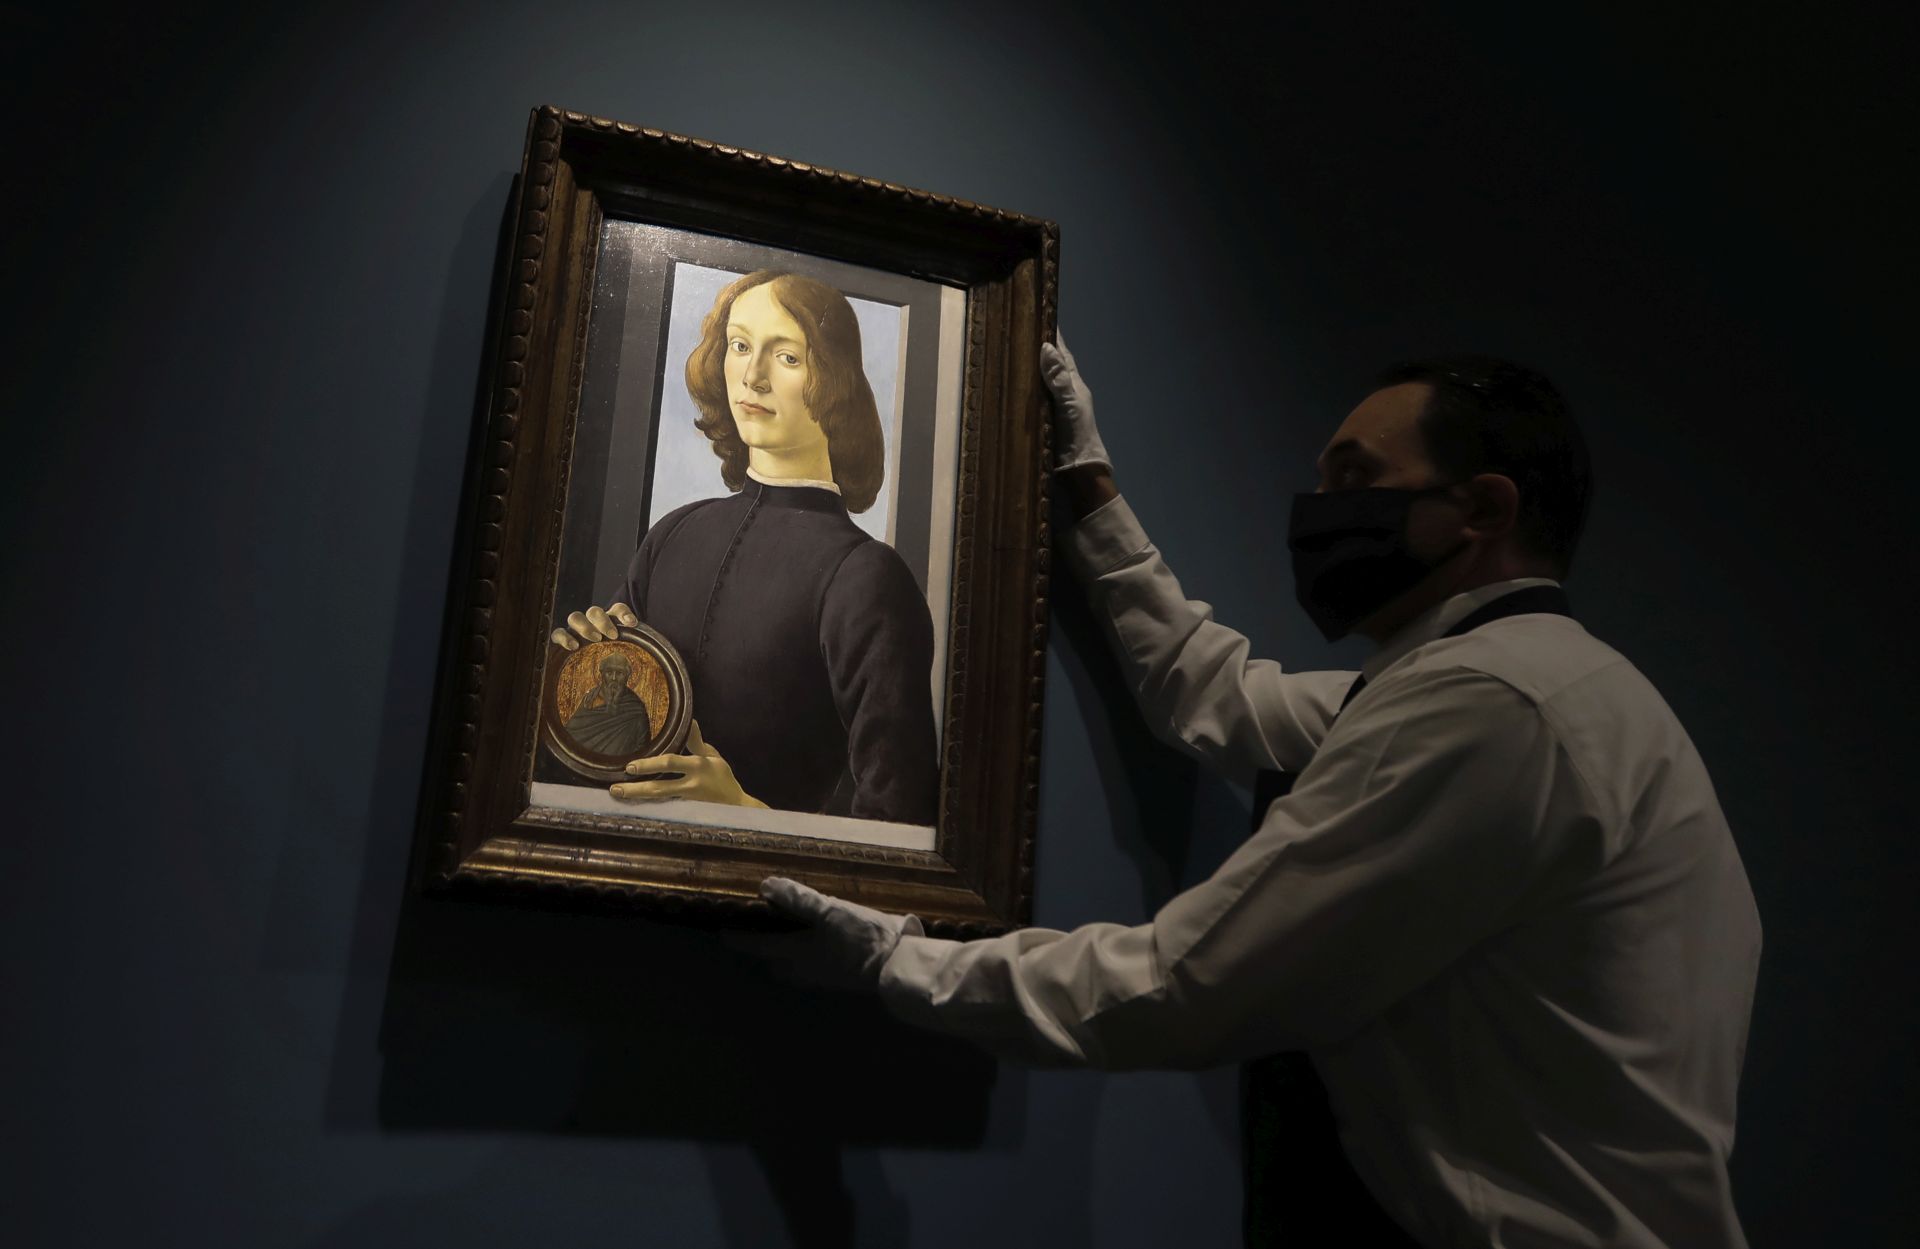 epa08692895 Sandro Botticelli's 15th-century portrait of a 'Young Man Holding a Roundel' is displayed by an employee at Sotheby's Auction house in New York, New York, USA, 23 September 2020 (issued 24 September 2020).The painting is estimated to sell in excess of 80 million US dollars as the main highlight of Sotheby's Masters Week sale. EPA/PETER FOLEY


















estimated to sell in excess of 80 million US dollars as the main highlight of our Masters Week sale  EPA-EFE/Peter Foley